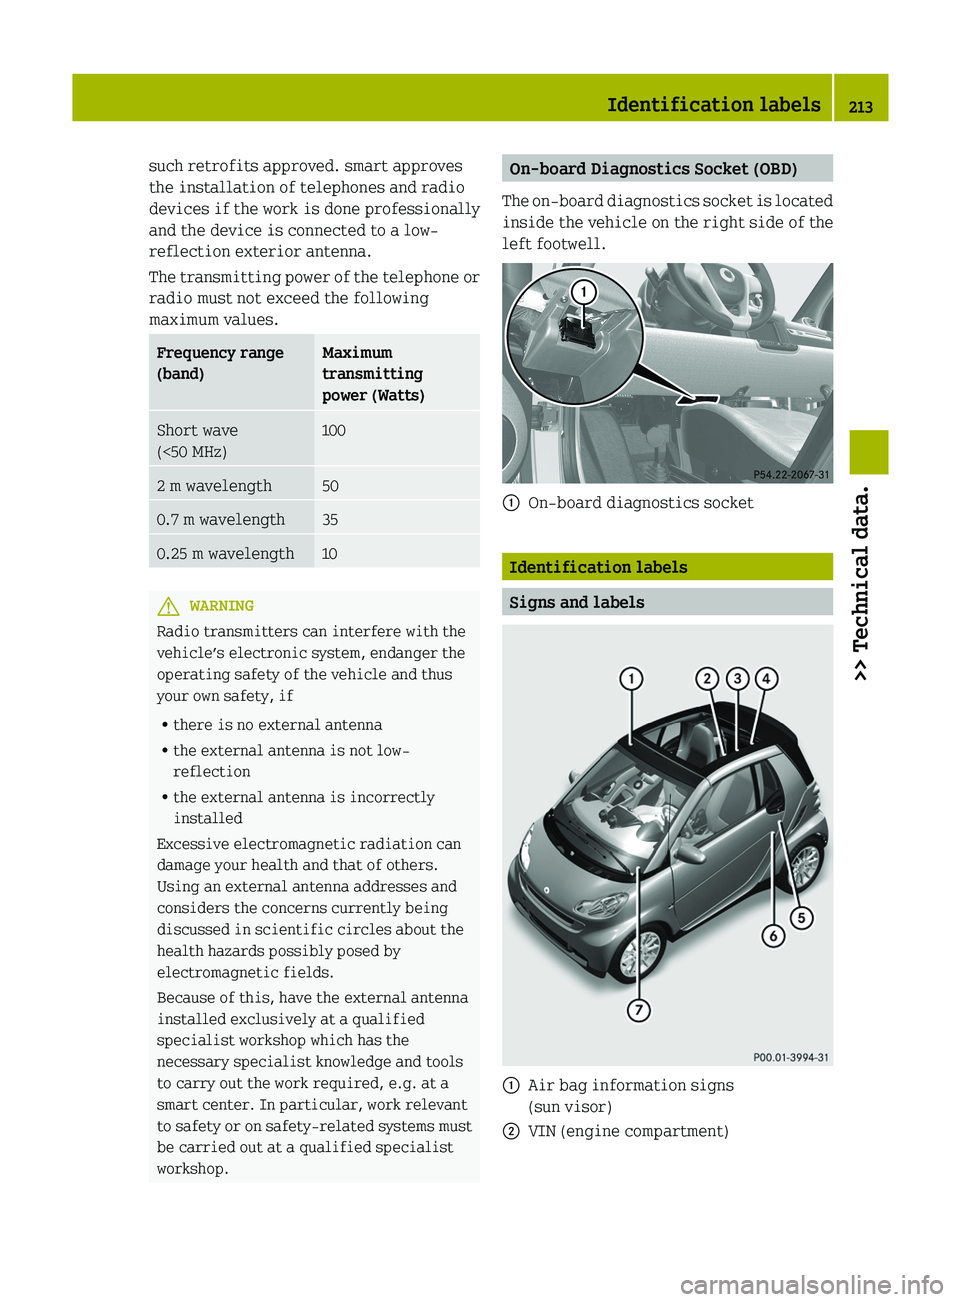 SMART FORTWO COUPE 2012  Owners Manual such retrofits approved. smart approves
the installation of telephones and radio
devices if the work is done professionally
and the device is connected to a low-
reflection exterior antenna.
The 
tran